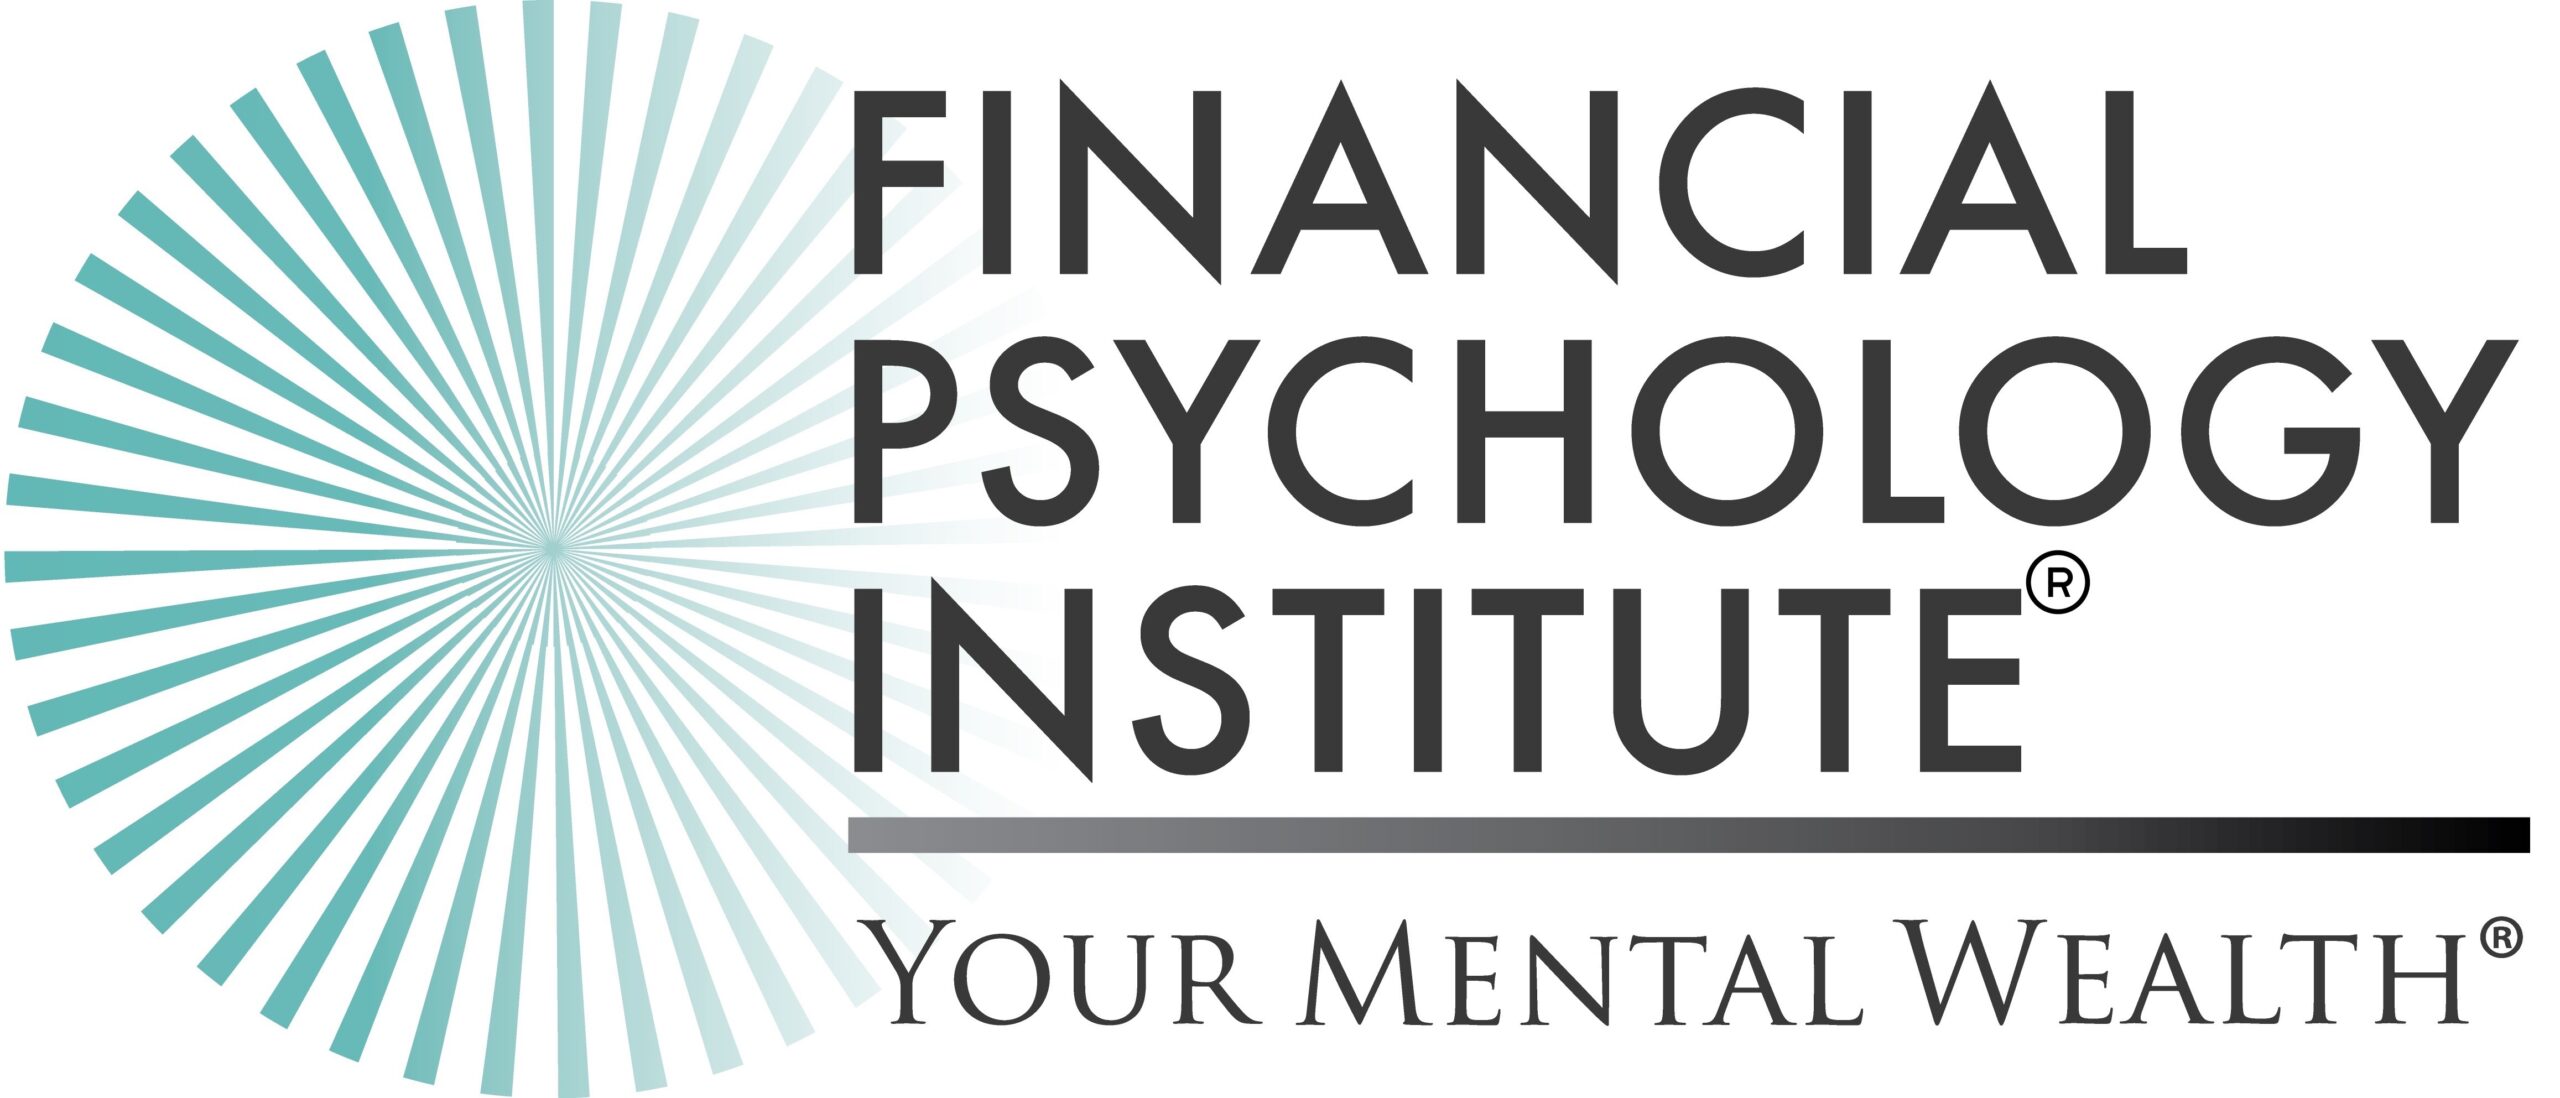 Financial Psychology Institute